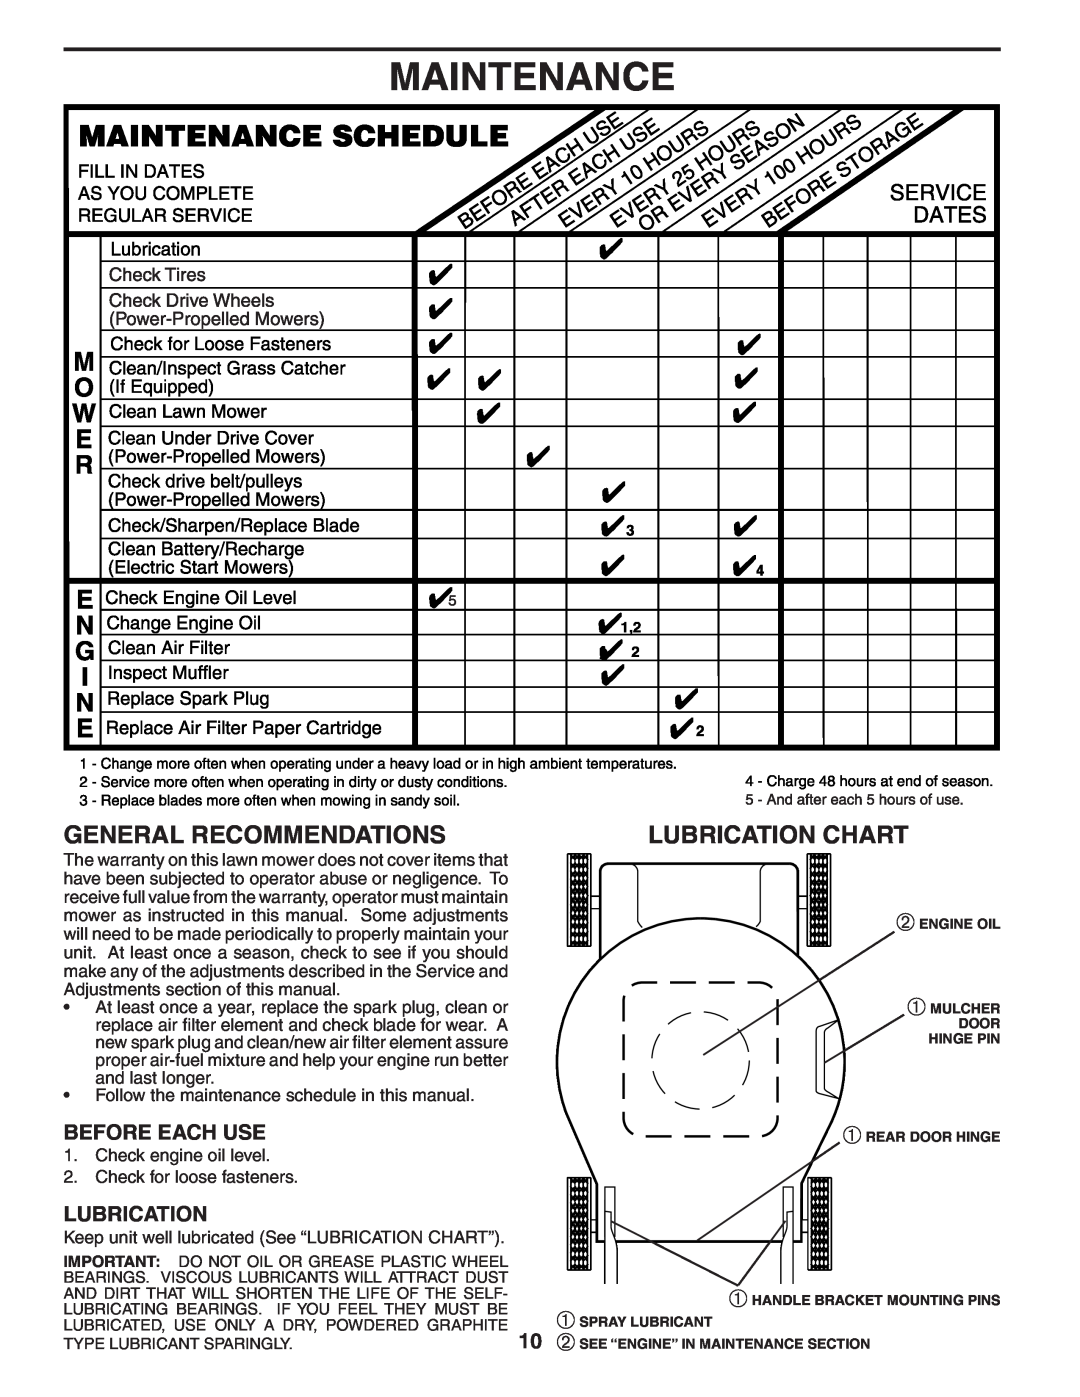 Husqvarna 5521RS owner manual Maintenance, General Recommendations, Lubrication Chart, Before Each Use 